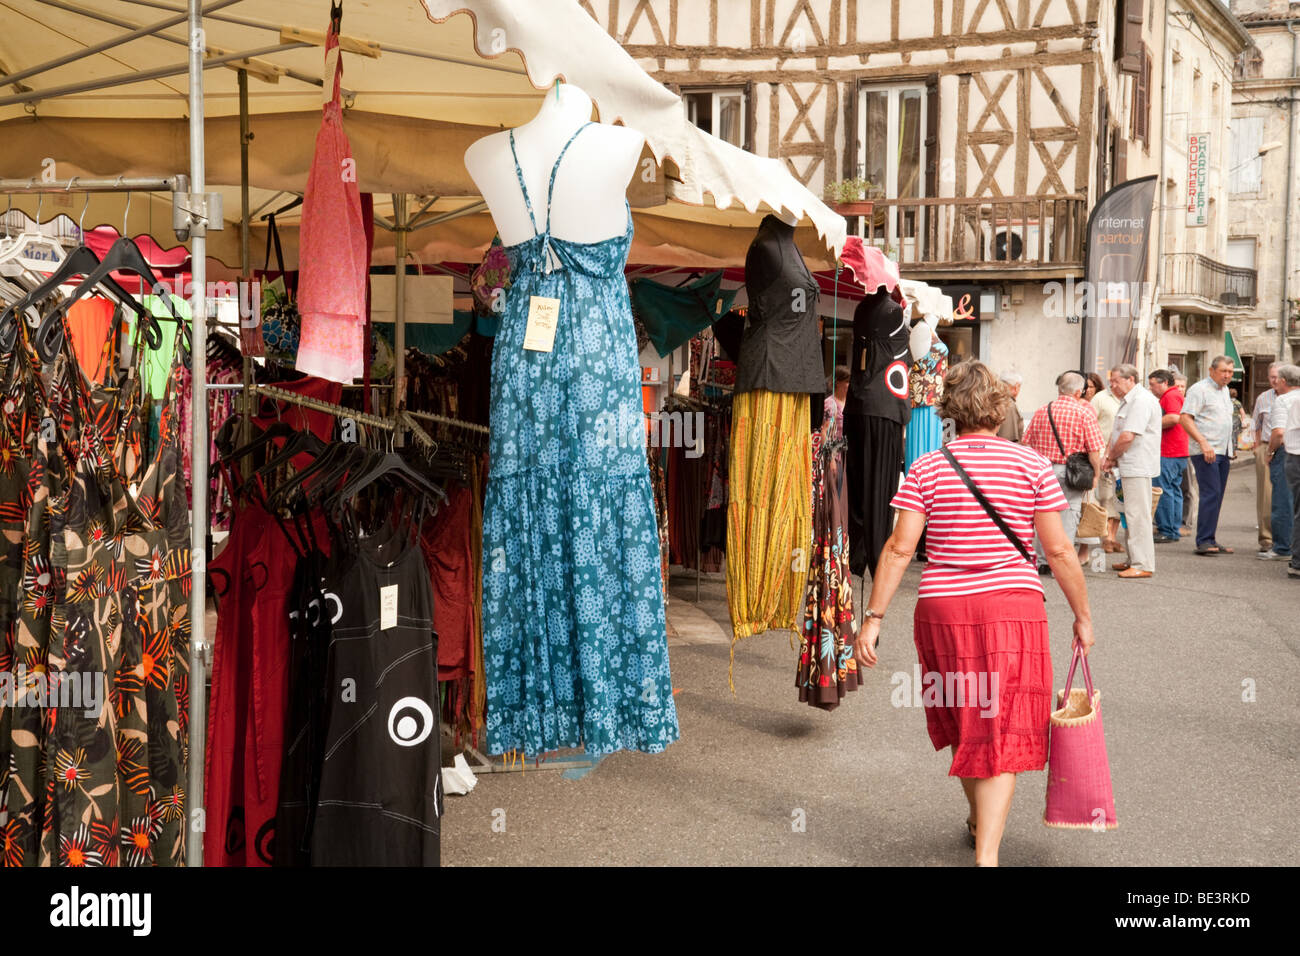 People  in the market in the town of Nerac, Aquitaine France Stock Photo